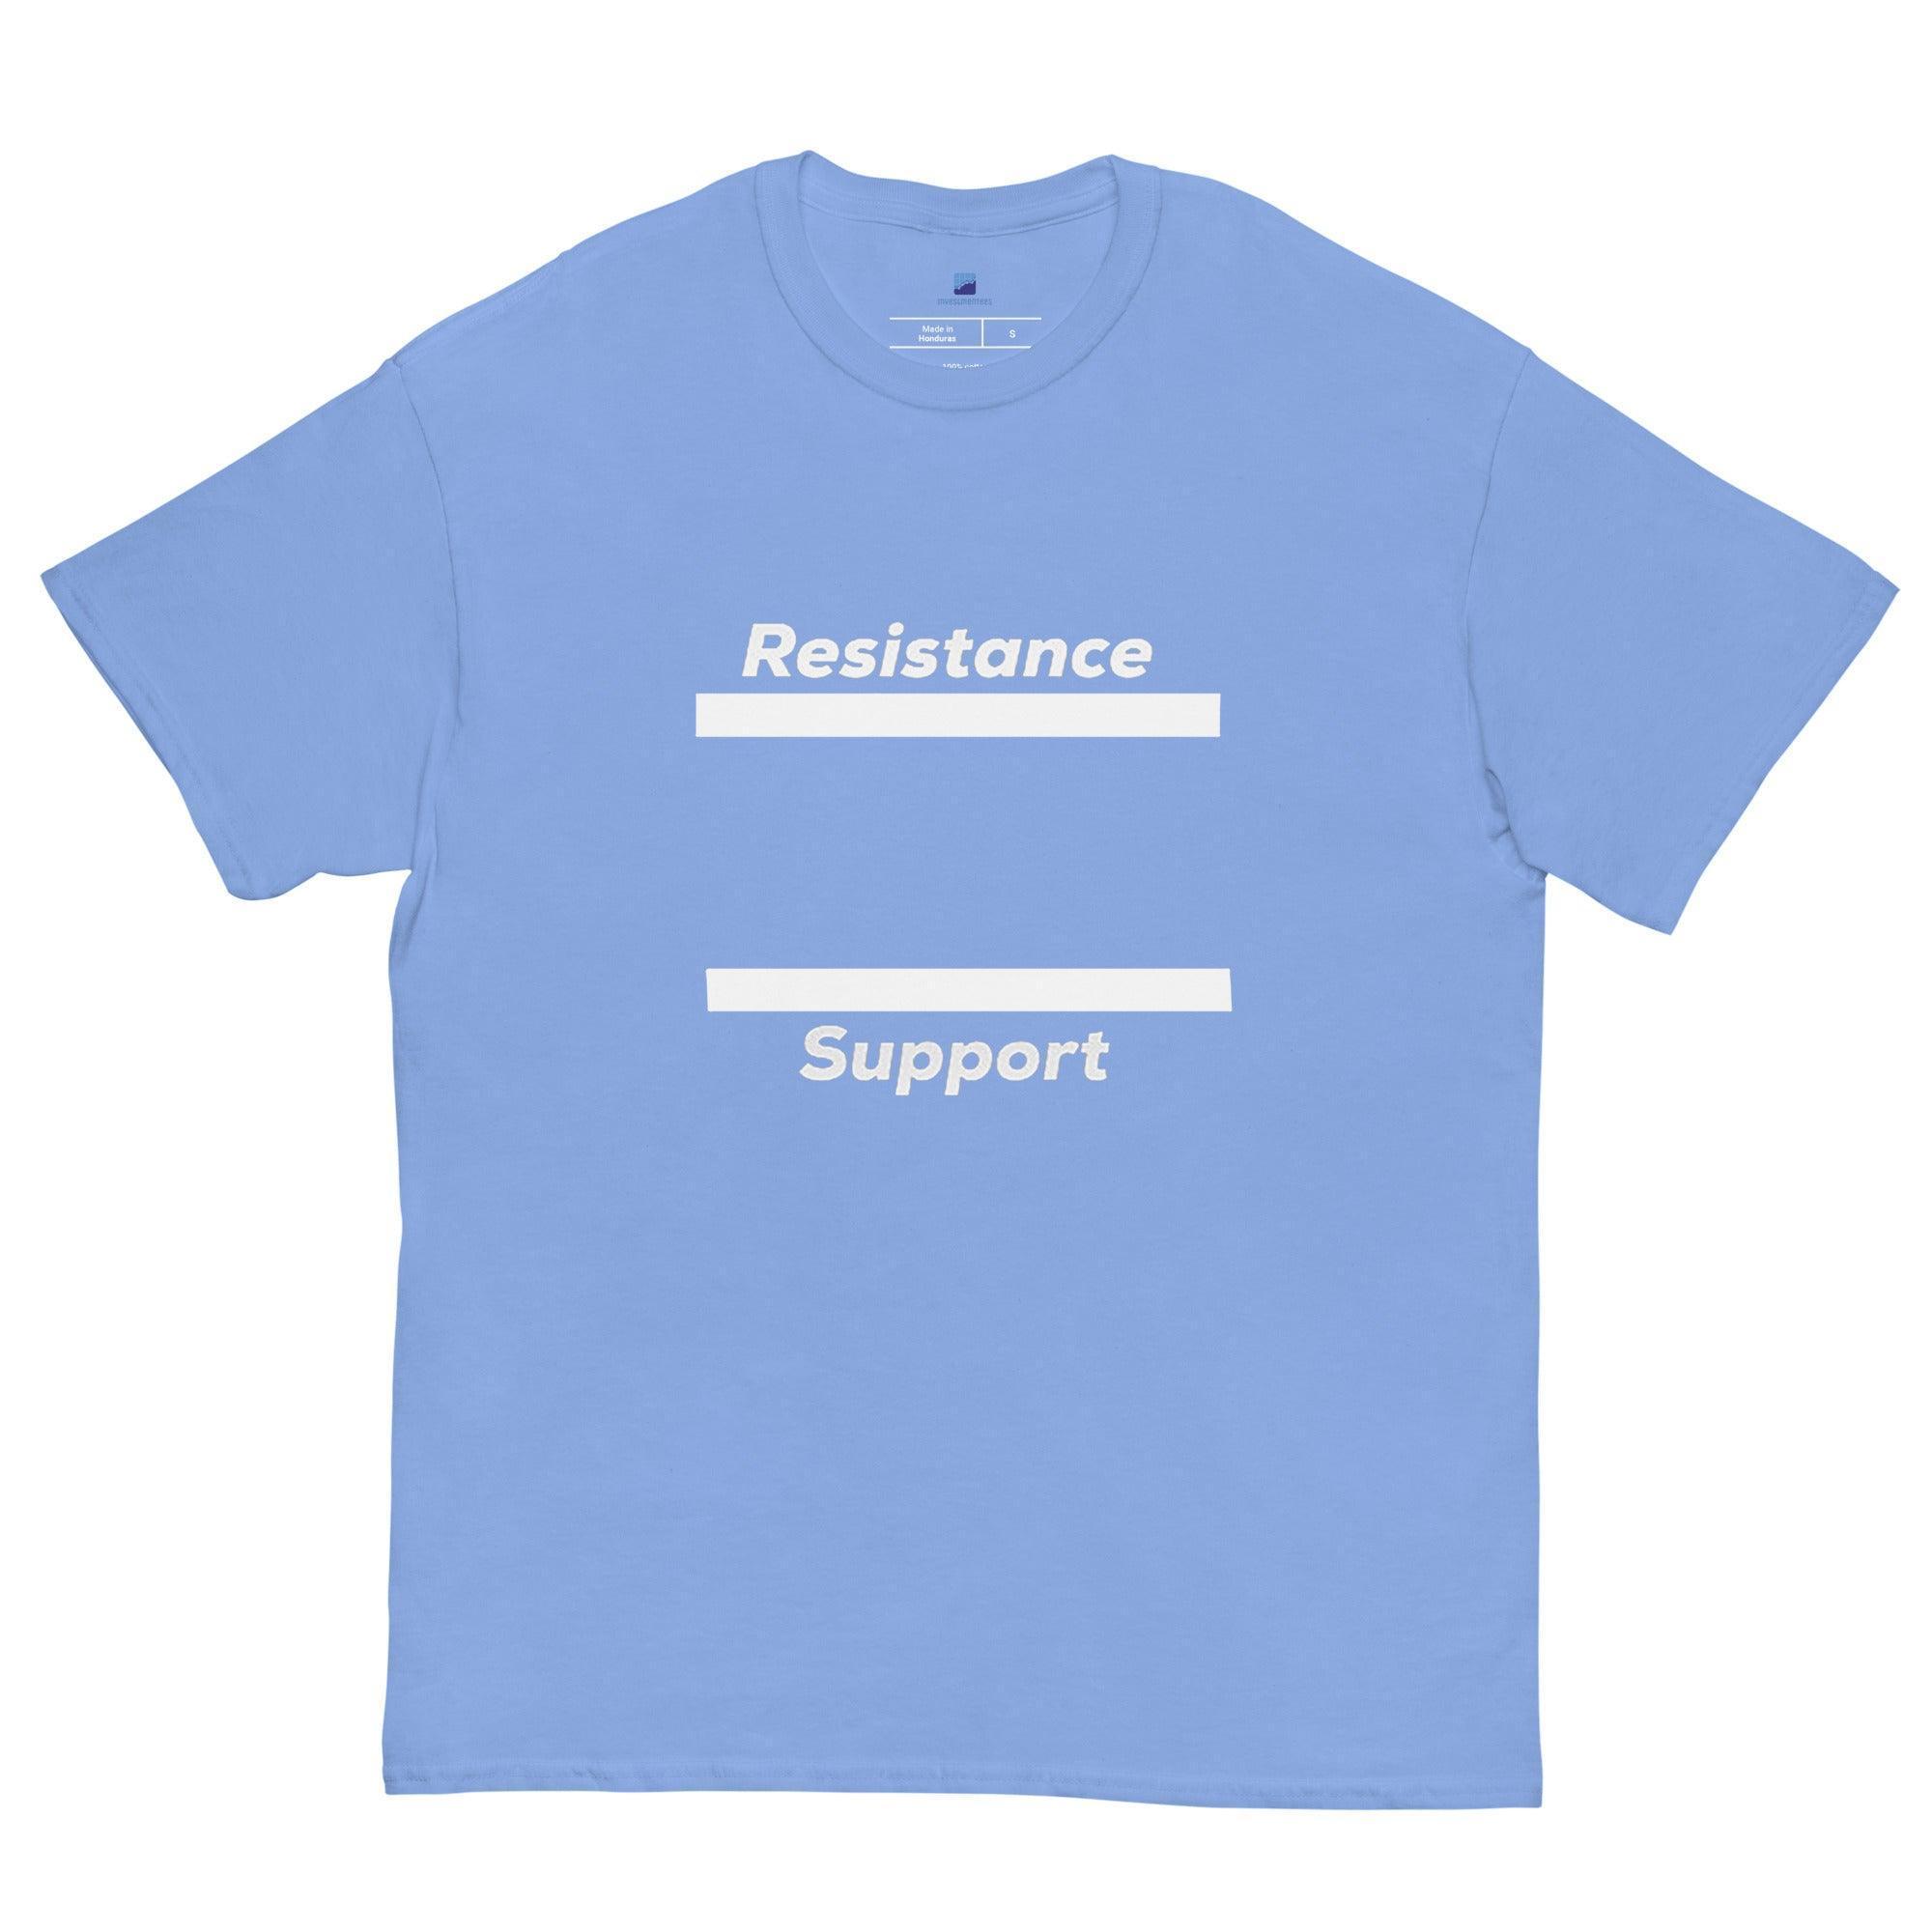 Support-Resistance T-Shirt - InvestmenTees